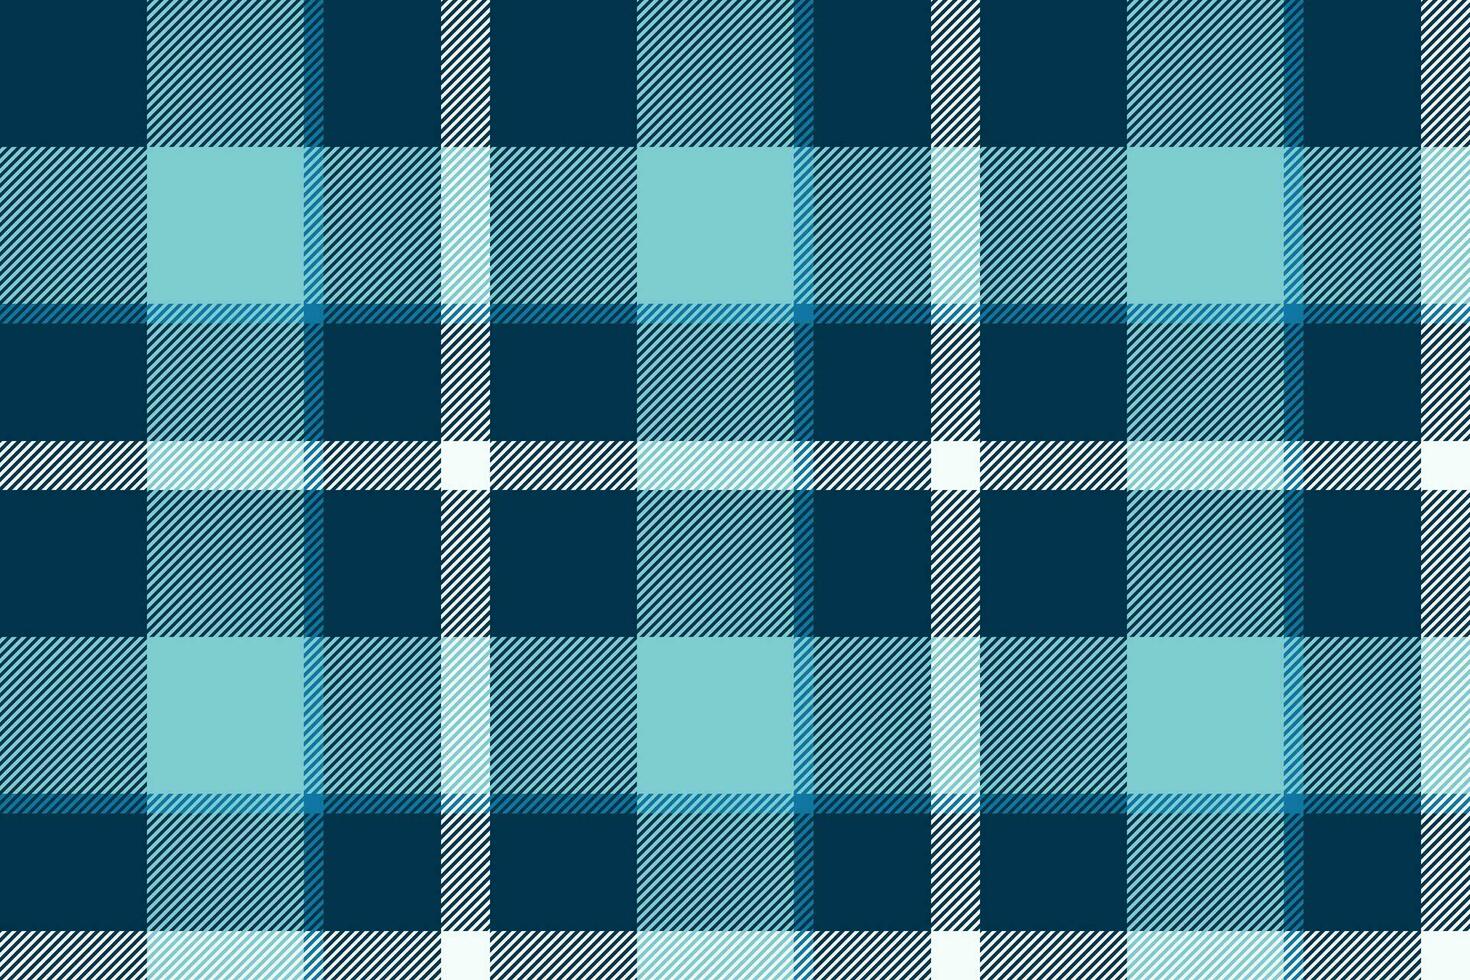 Plaid background, check seamless pattern in blue. Vector fabric texture for textile print, wrapping paper, gift card or wallpaper.